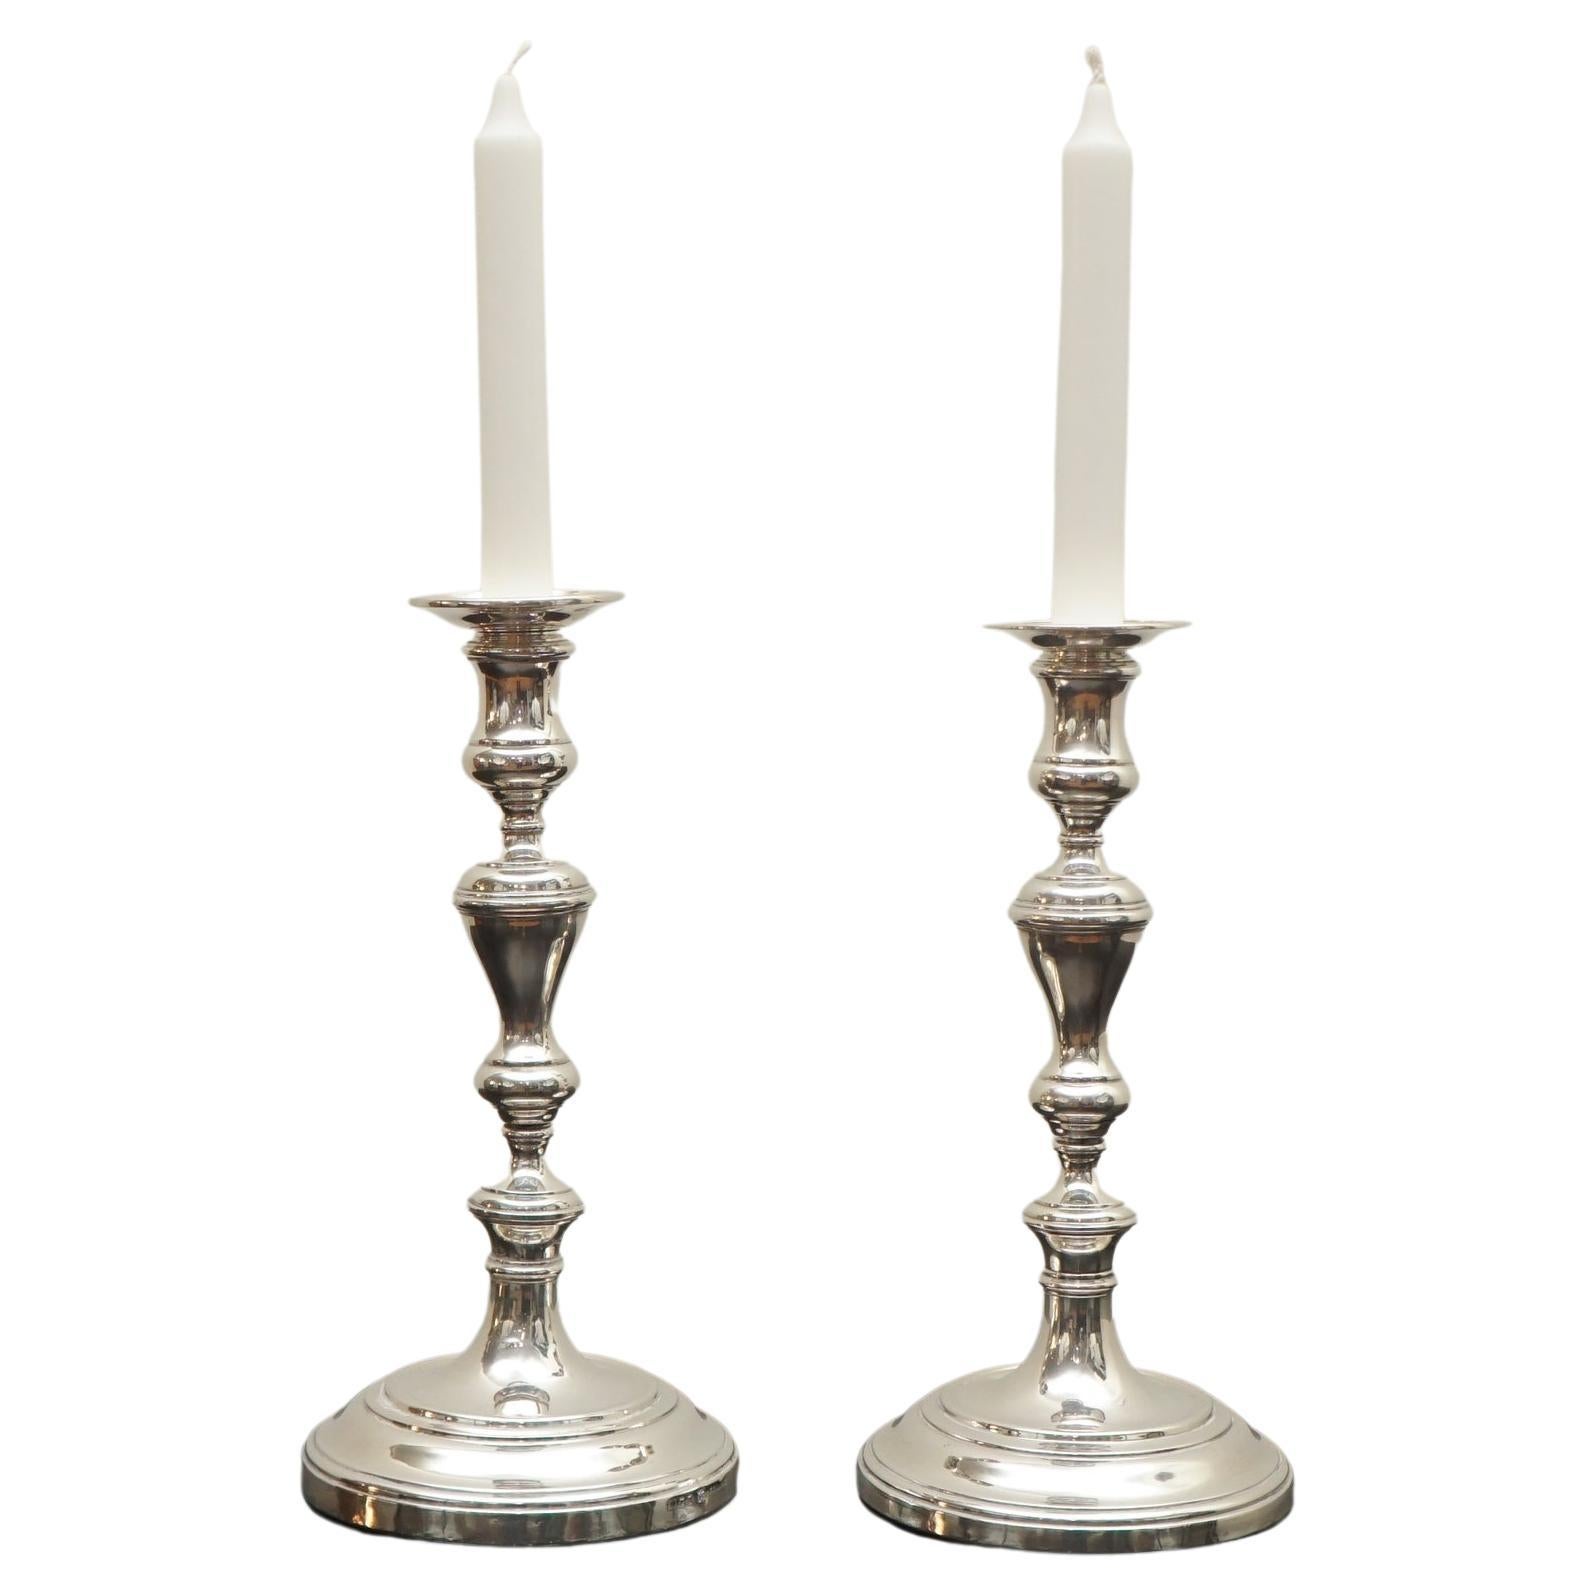 William Comyns & Sons Candle Holders